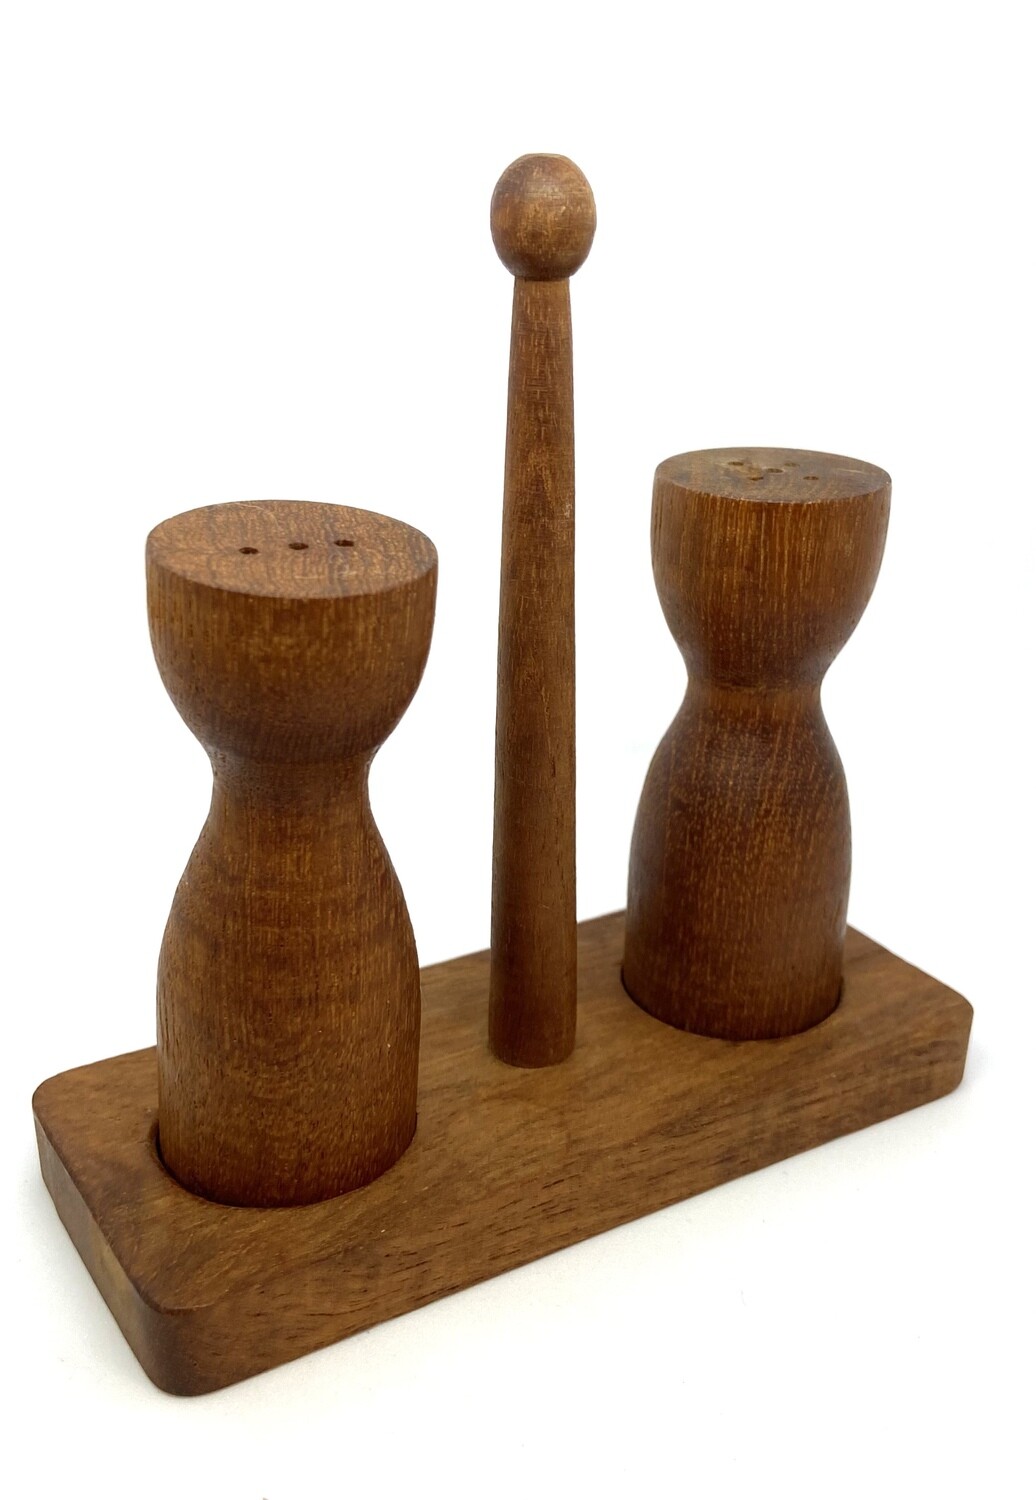 Teak Wood Salt and Pepper Shaker with Stand